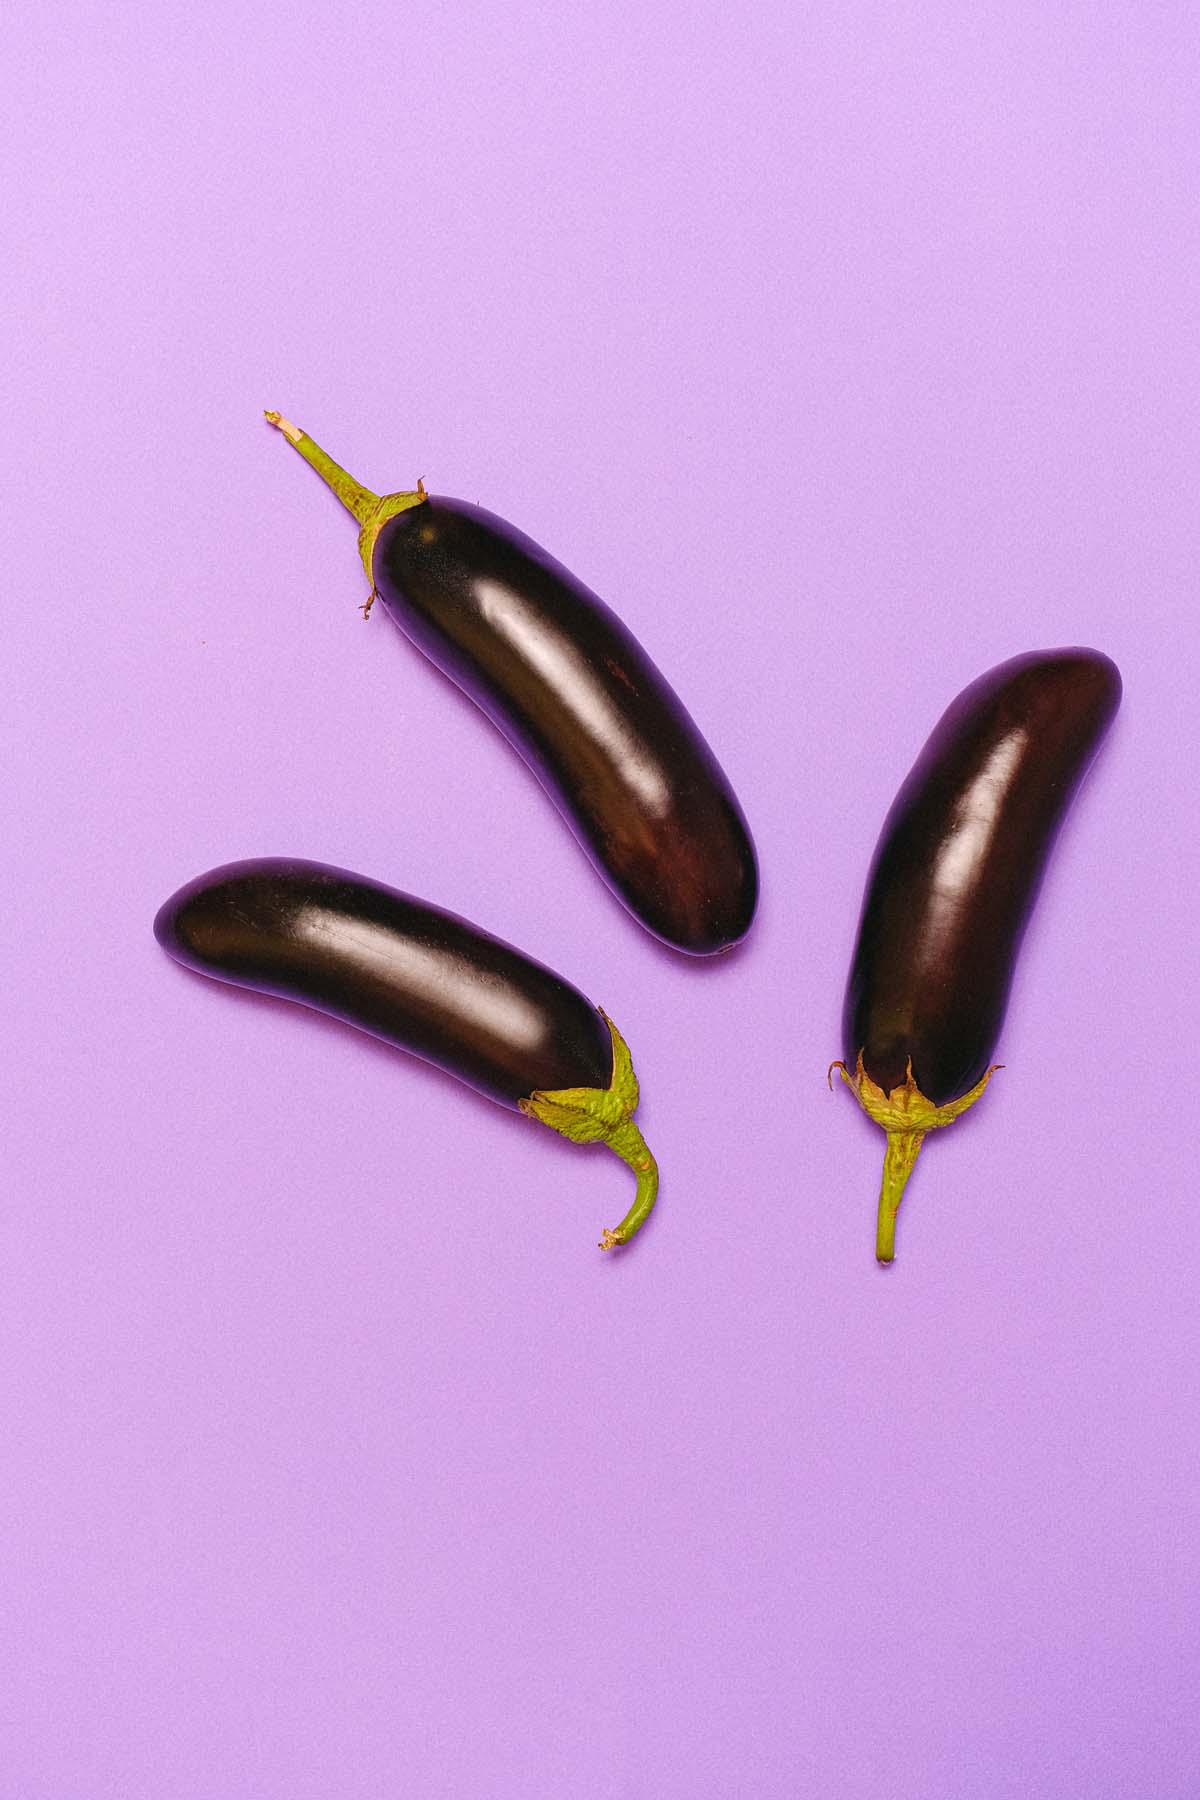 Three large eggplants on a lilac background.